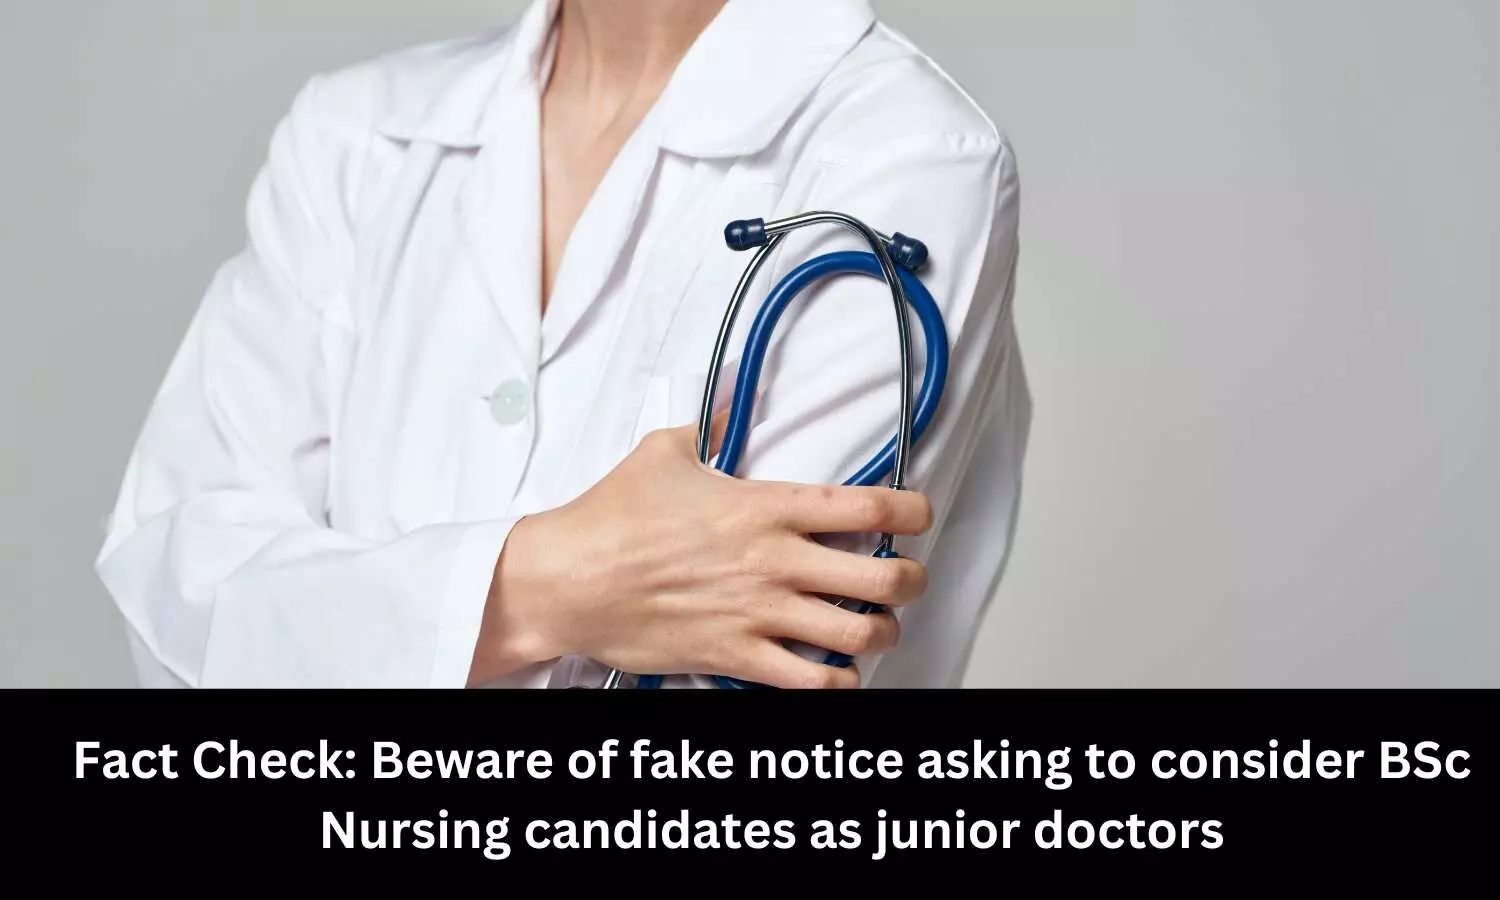 Beware of fake notice asking to consider BSc Nursing candidates as junior doctors